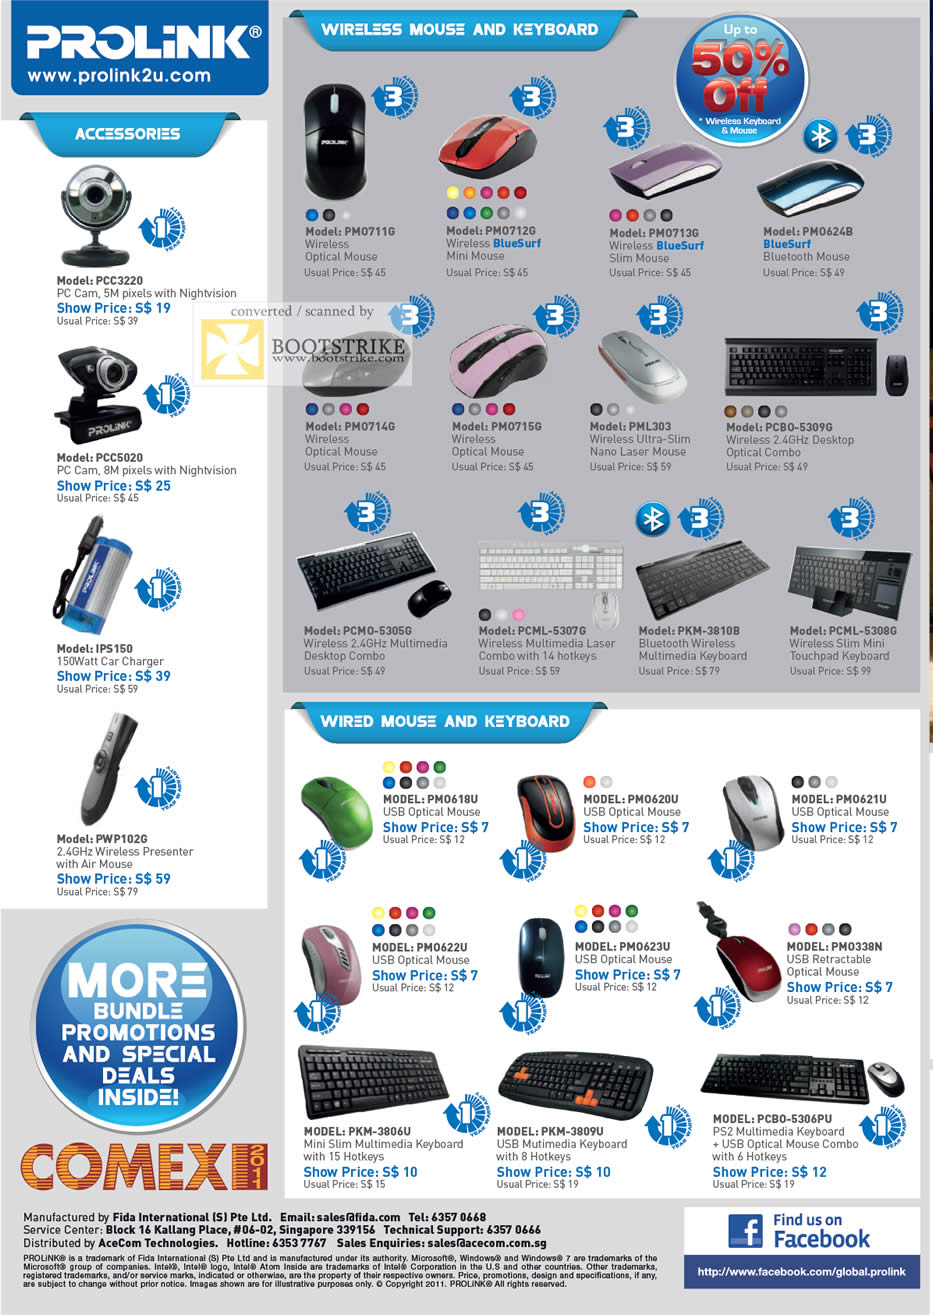 COMEX 2011 price list image brochure of Prolink Webcam Mouse Wireless Bluesurf Keyboard Bluetooth Touchpad Car Charger Laser